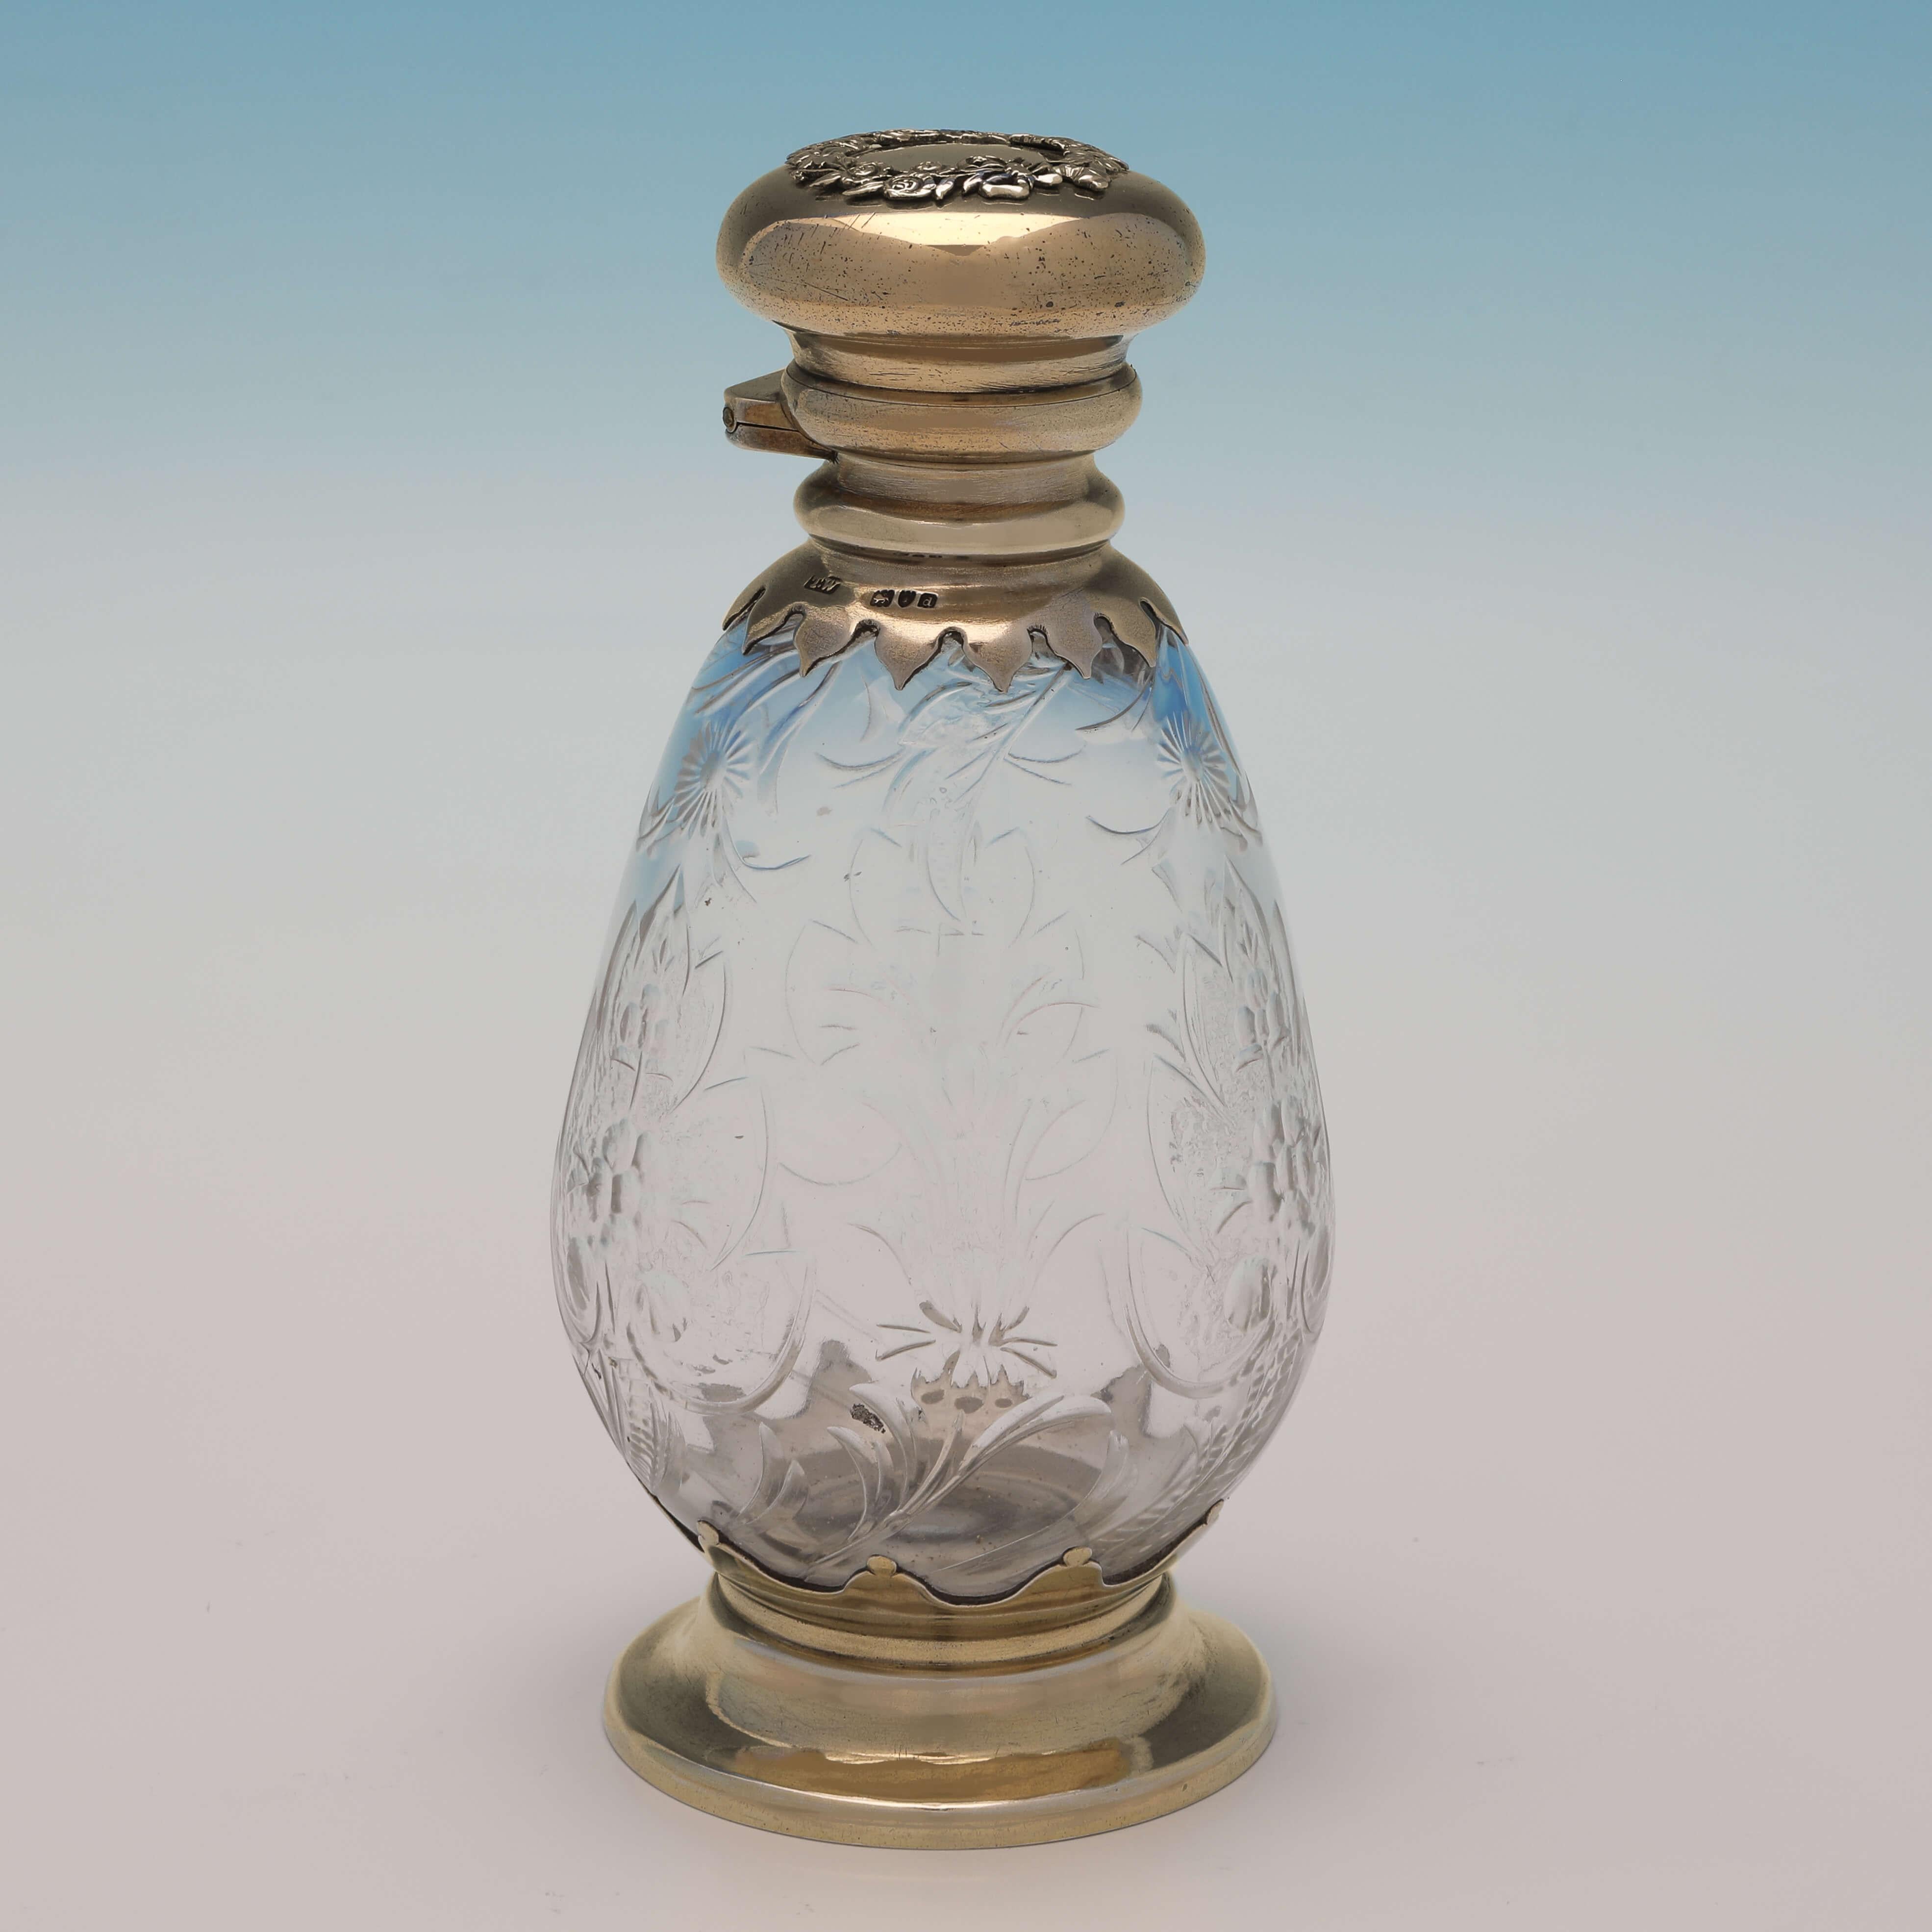 Hallmarked in London in 1899 by Thomas Whitehouse, this very attractive pair of Victorian, Antique Sterling Silver Scent Bottles, feature etched glass, and gilt silver tops and bases. Each scent bottle measures 6